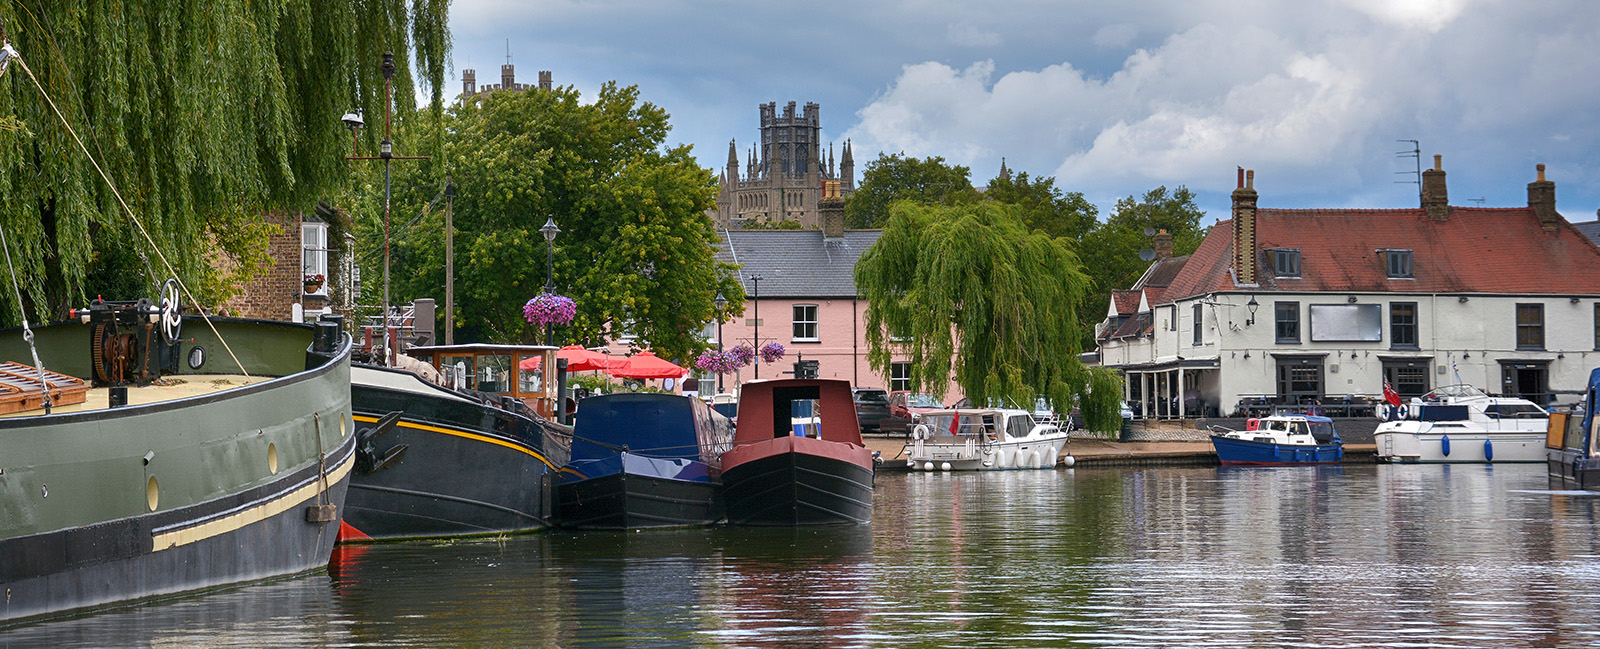 Ely in Cambridgeshire is the second smallest city in England. It has a beautiful Cathedral and some lovely surrounding countryside